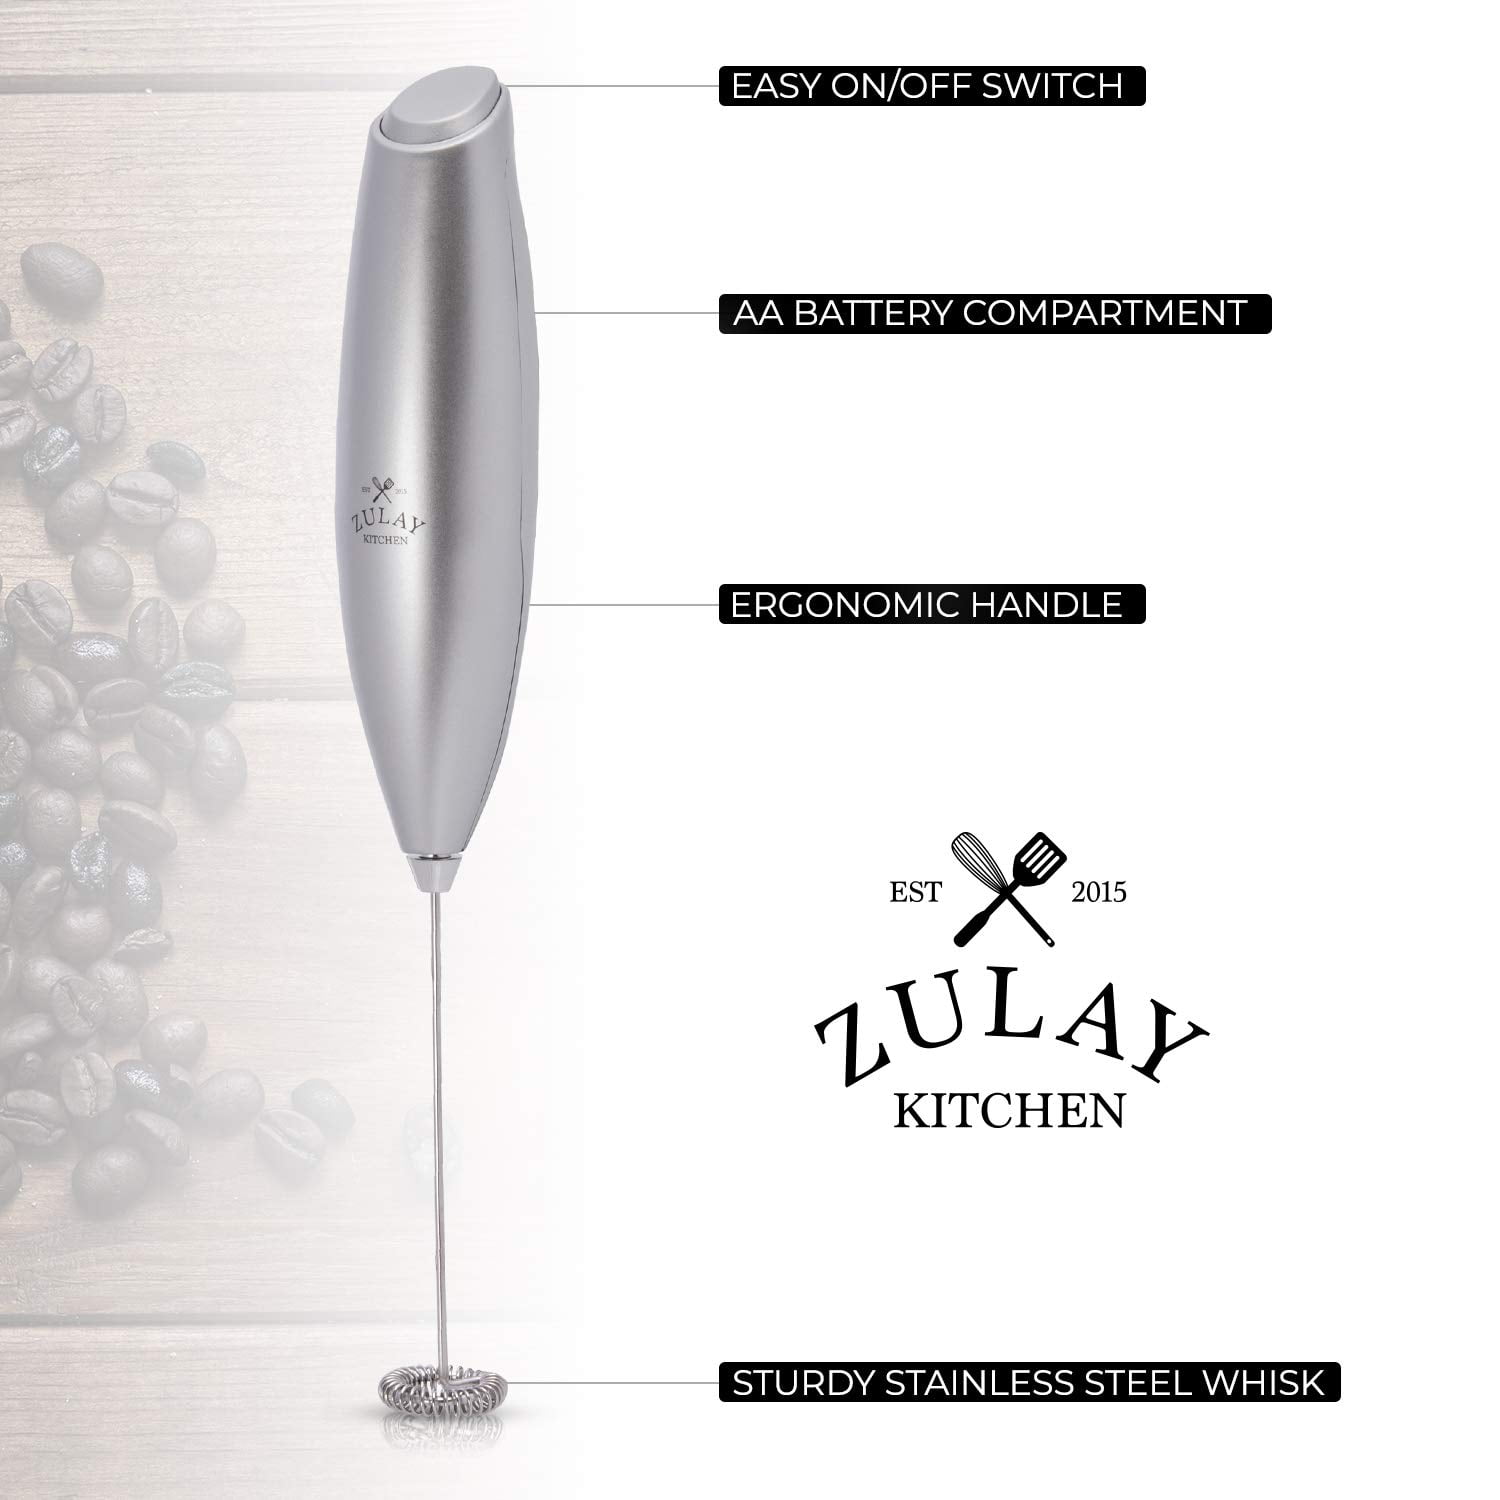 Zulay Kitchen Milk Frother with Batteries Included - Silver, 1